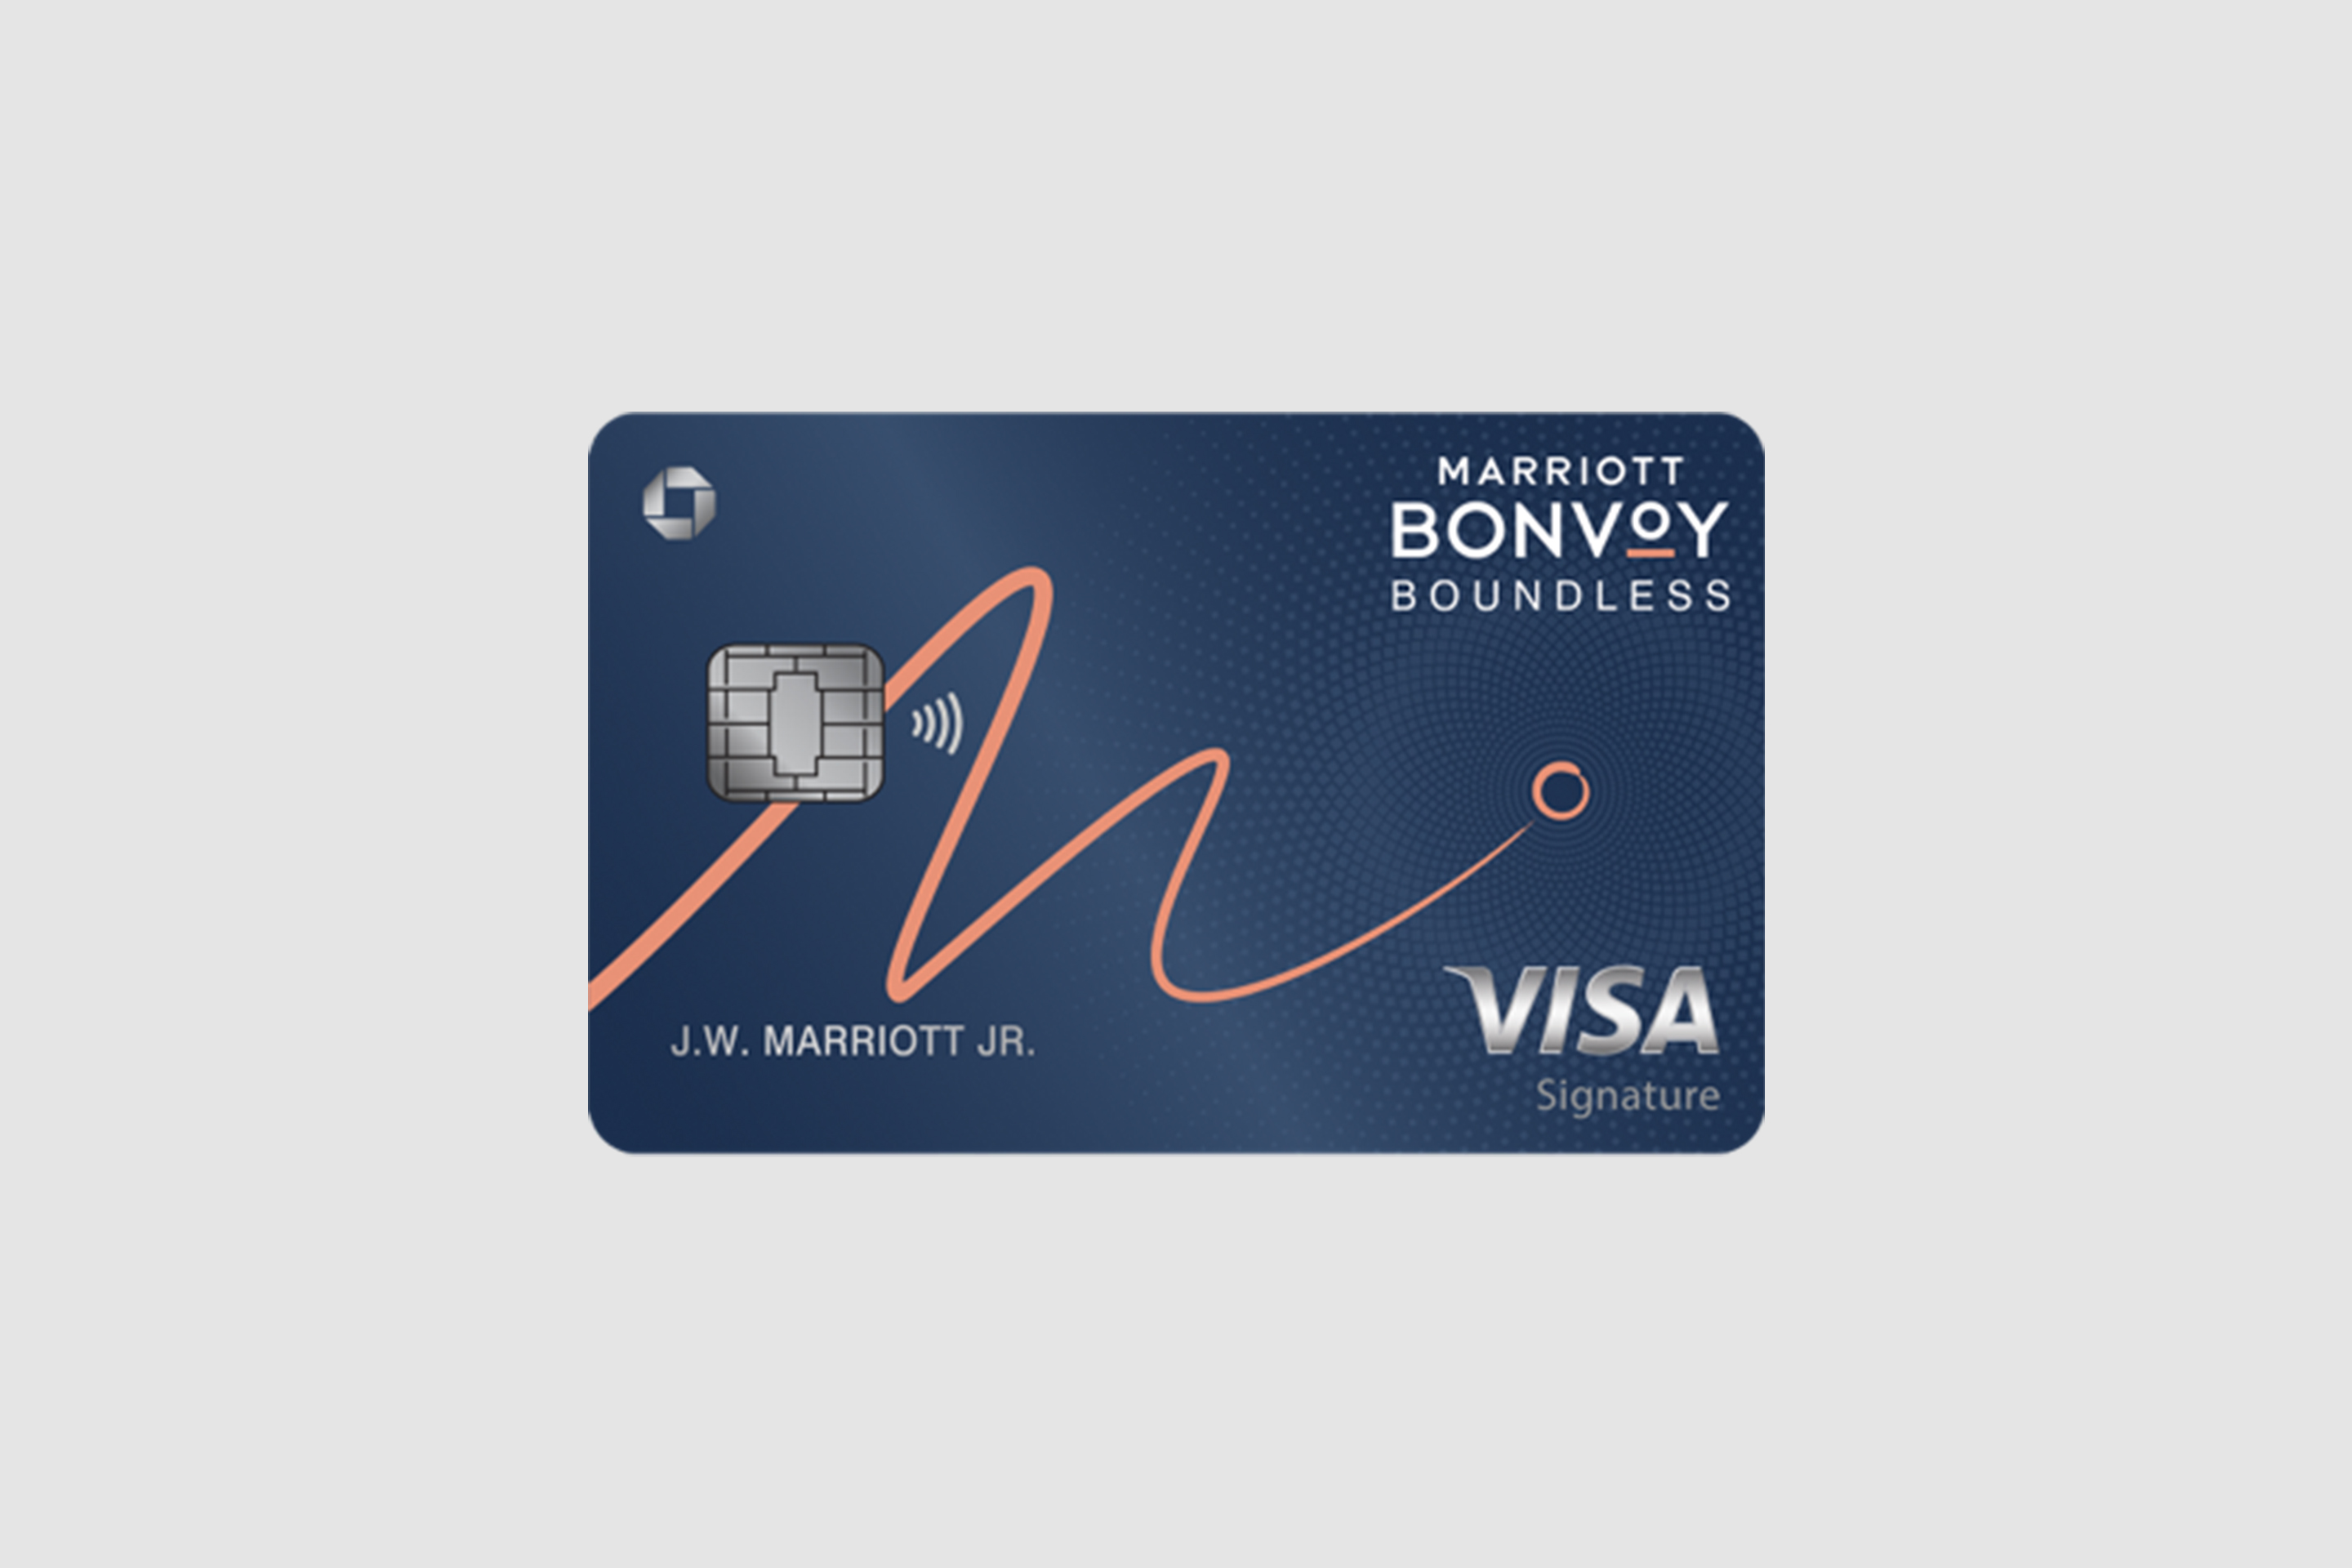 Marriott Bonvoy Boundless Credit Card by Chase